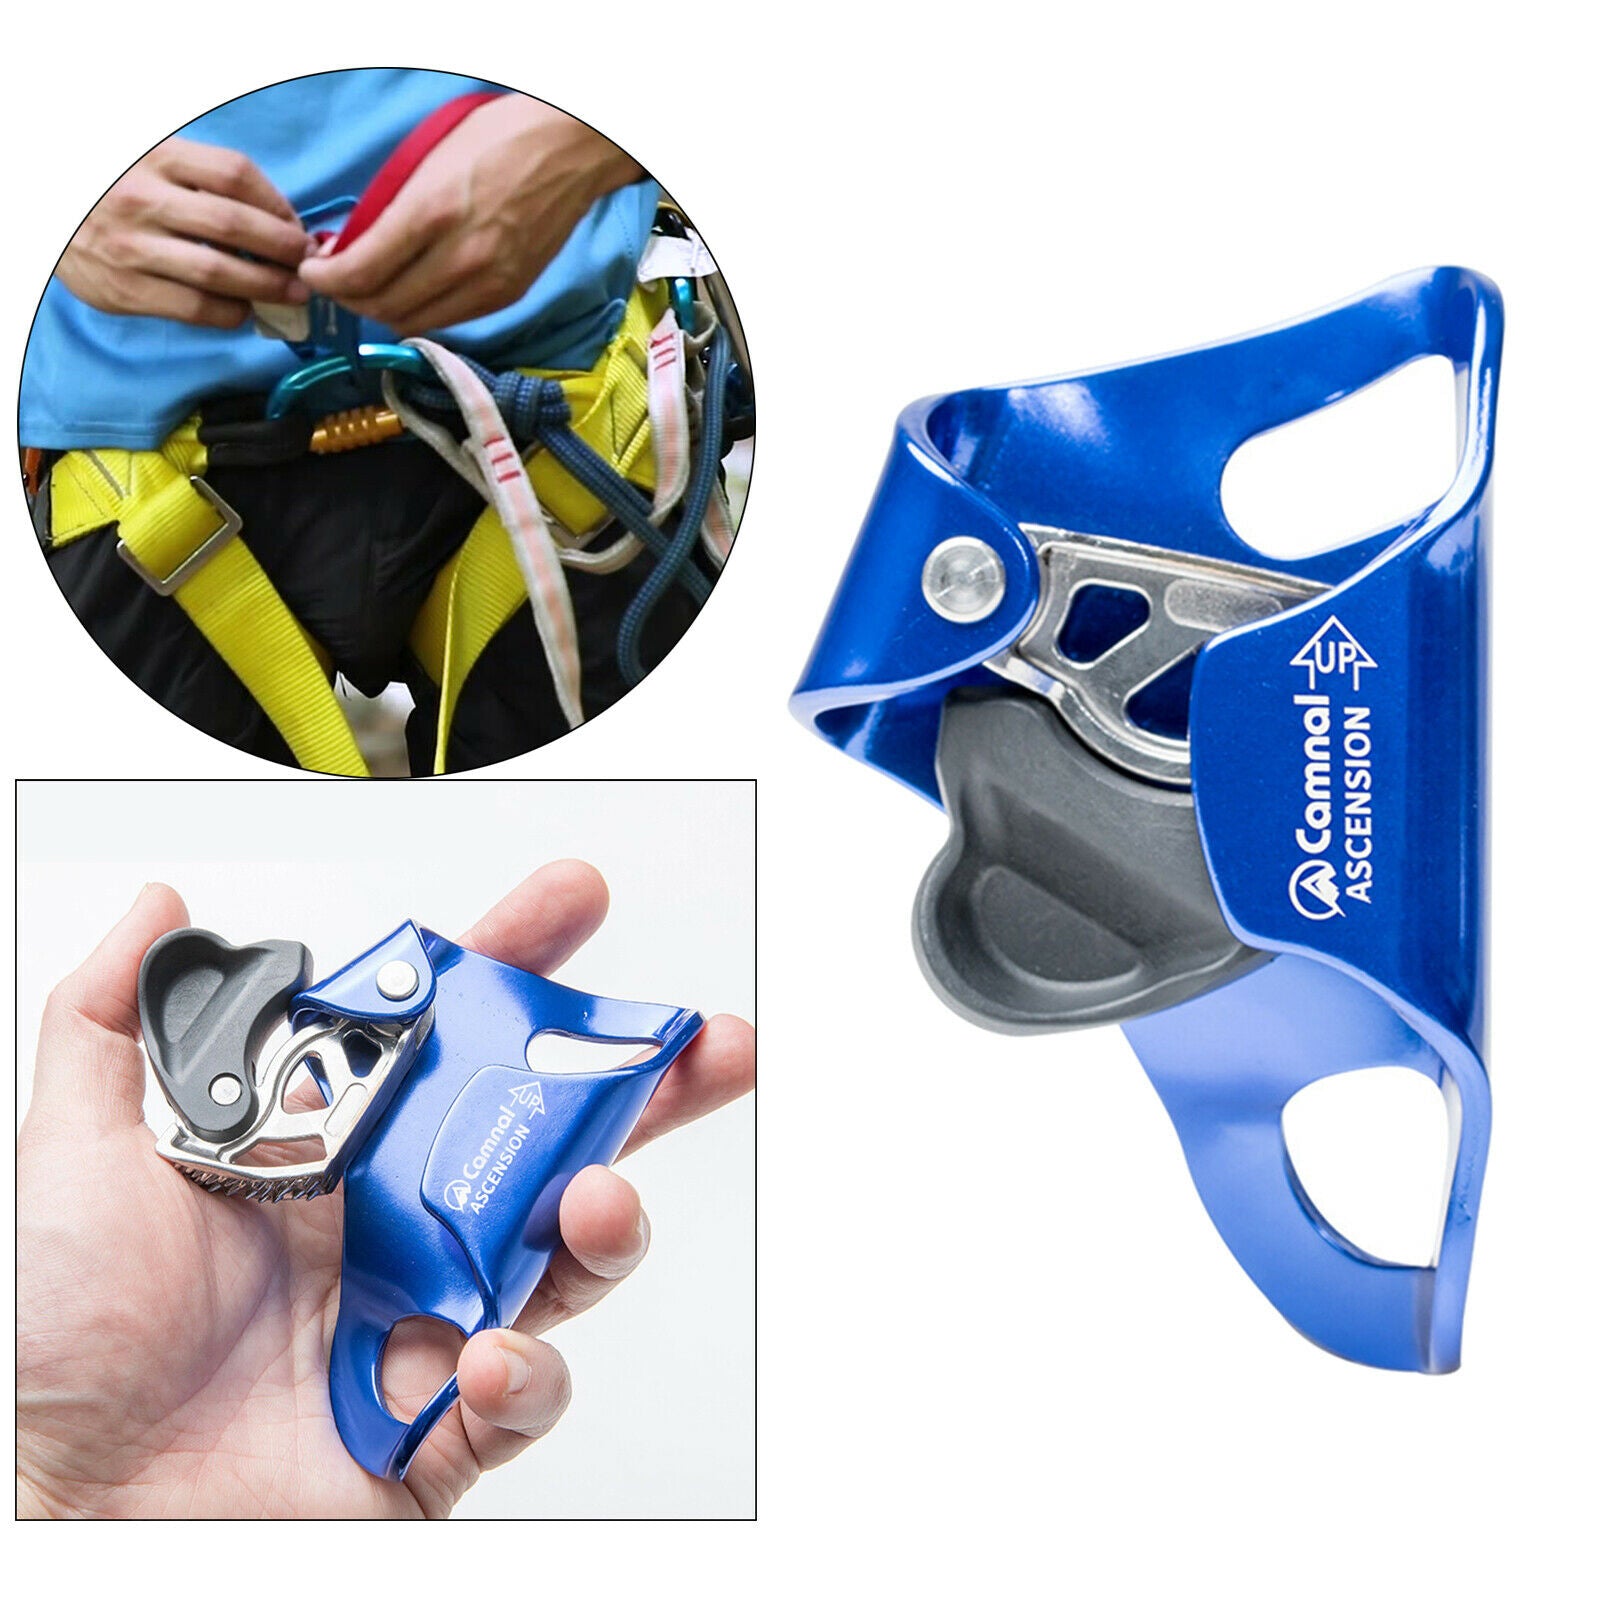 Climbing Chest Ascender Hand Ascender Rigging Sport Caving Accessories